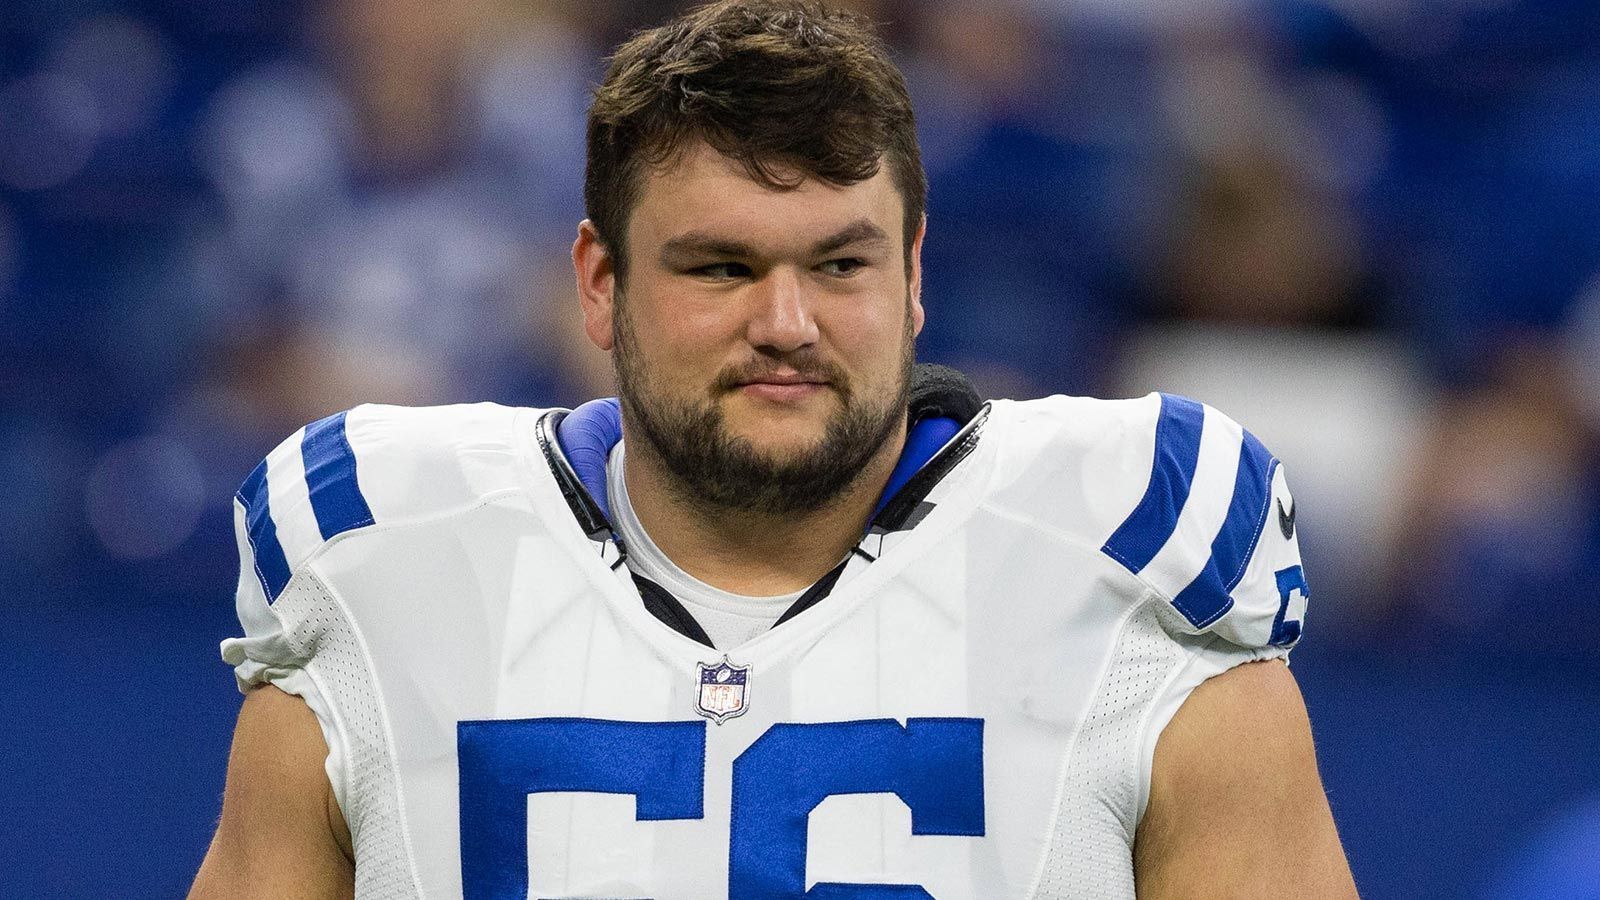 
                <strong>Quenton Nelson - Indianapolis Colts</strong><br>
                &#x2022; Bonus: 19 Millionen Dollar<br>
              